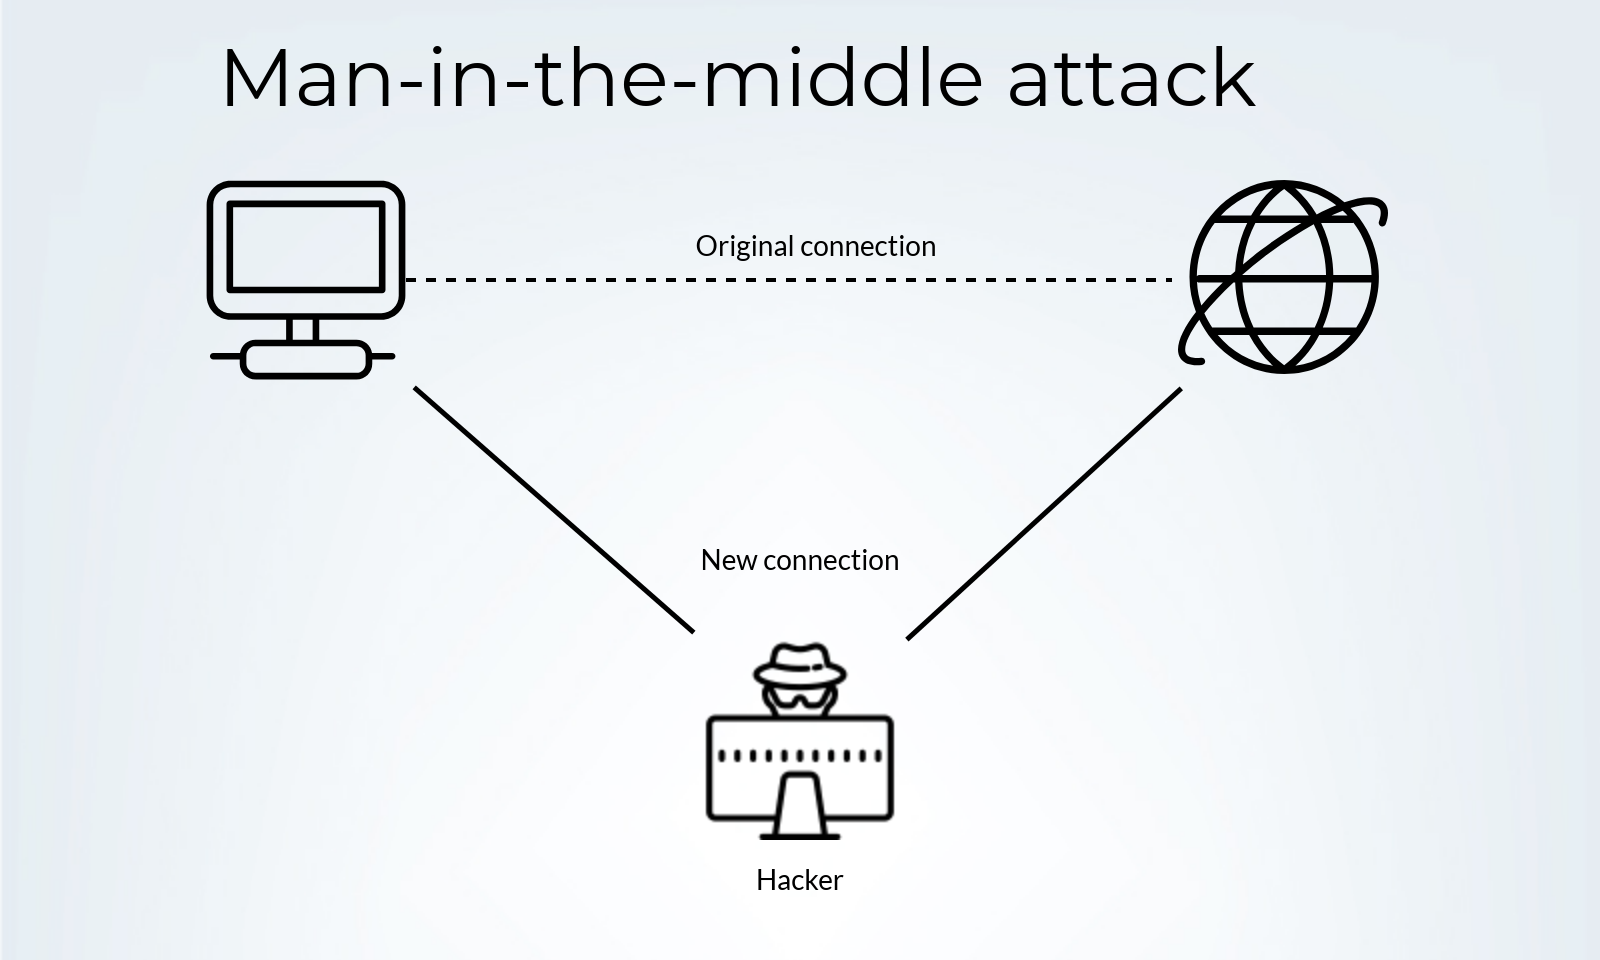 Man-in-the-middle attack scheme